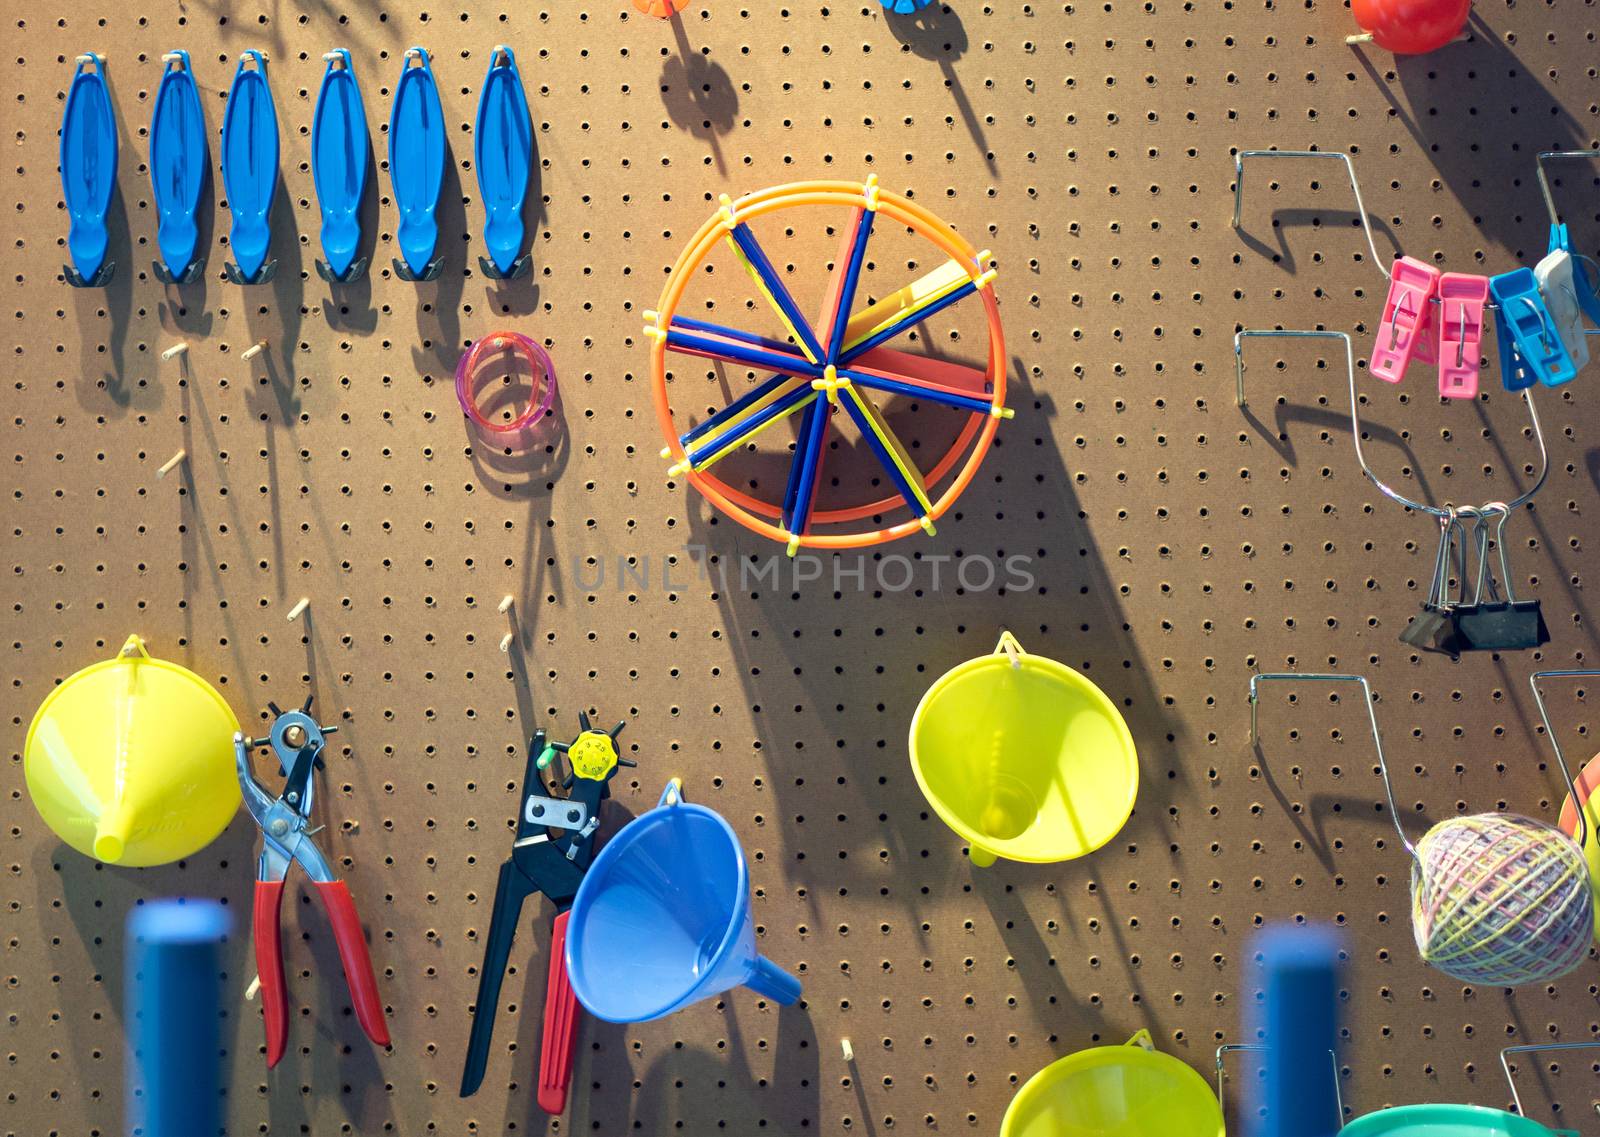 Mixed mechanic and many tools on a wood surface by pkproject